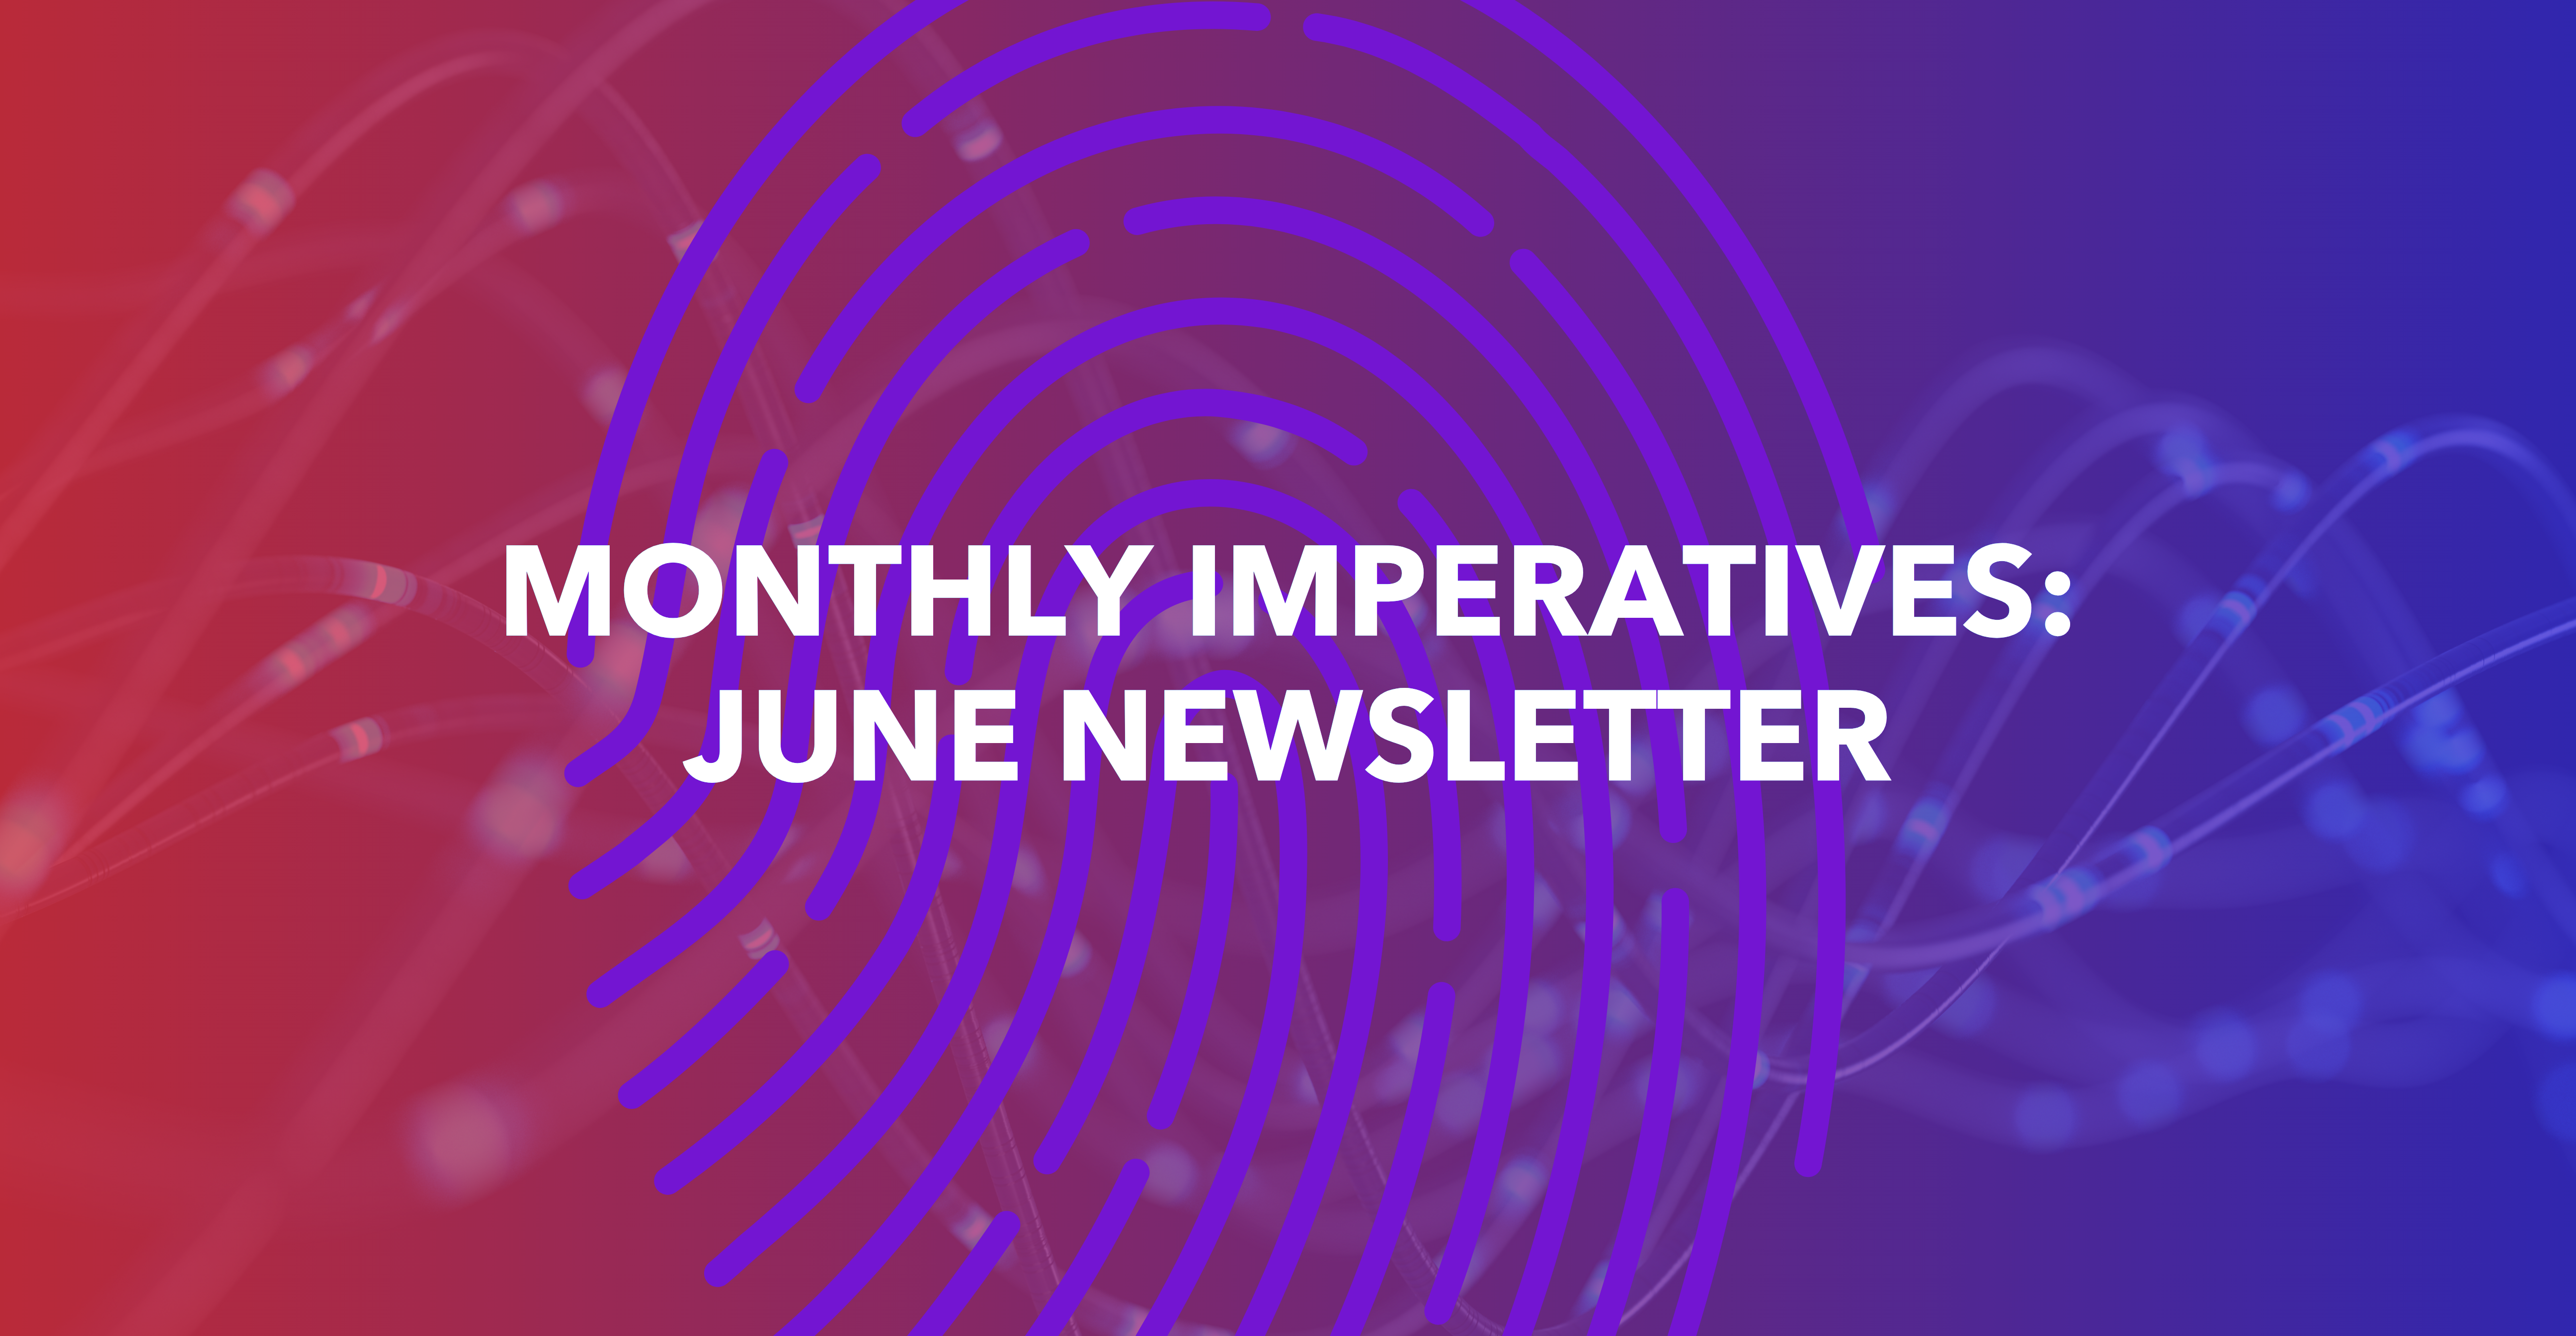 Your June update from Strategic Imperatives